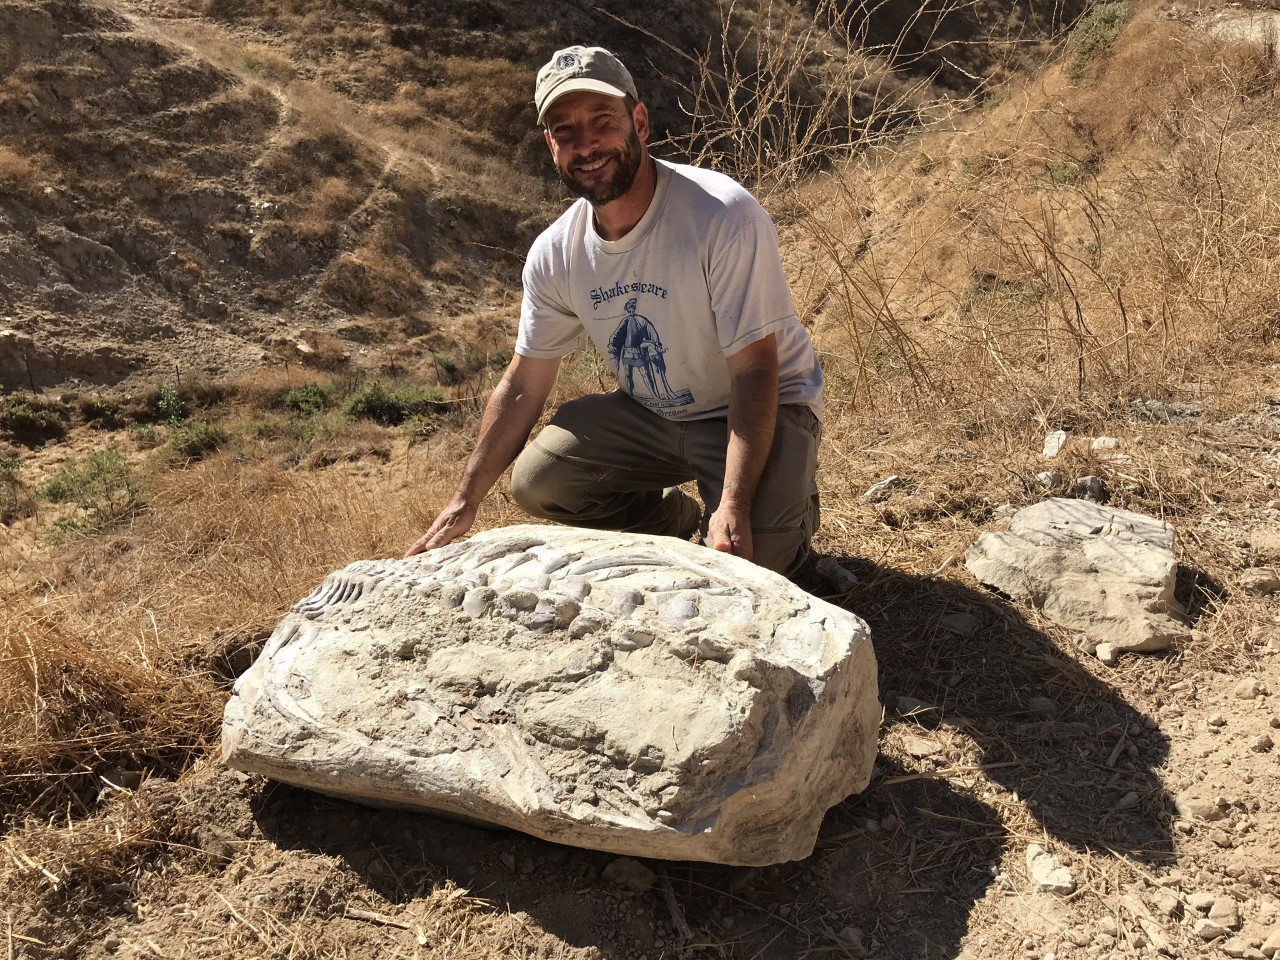 Russell Shapiro poses with the found 15-million-year-old whale vertebrae fossil in Simi Valley.